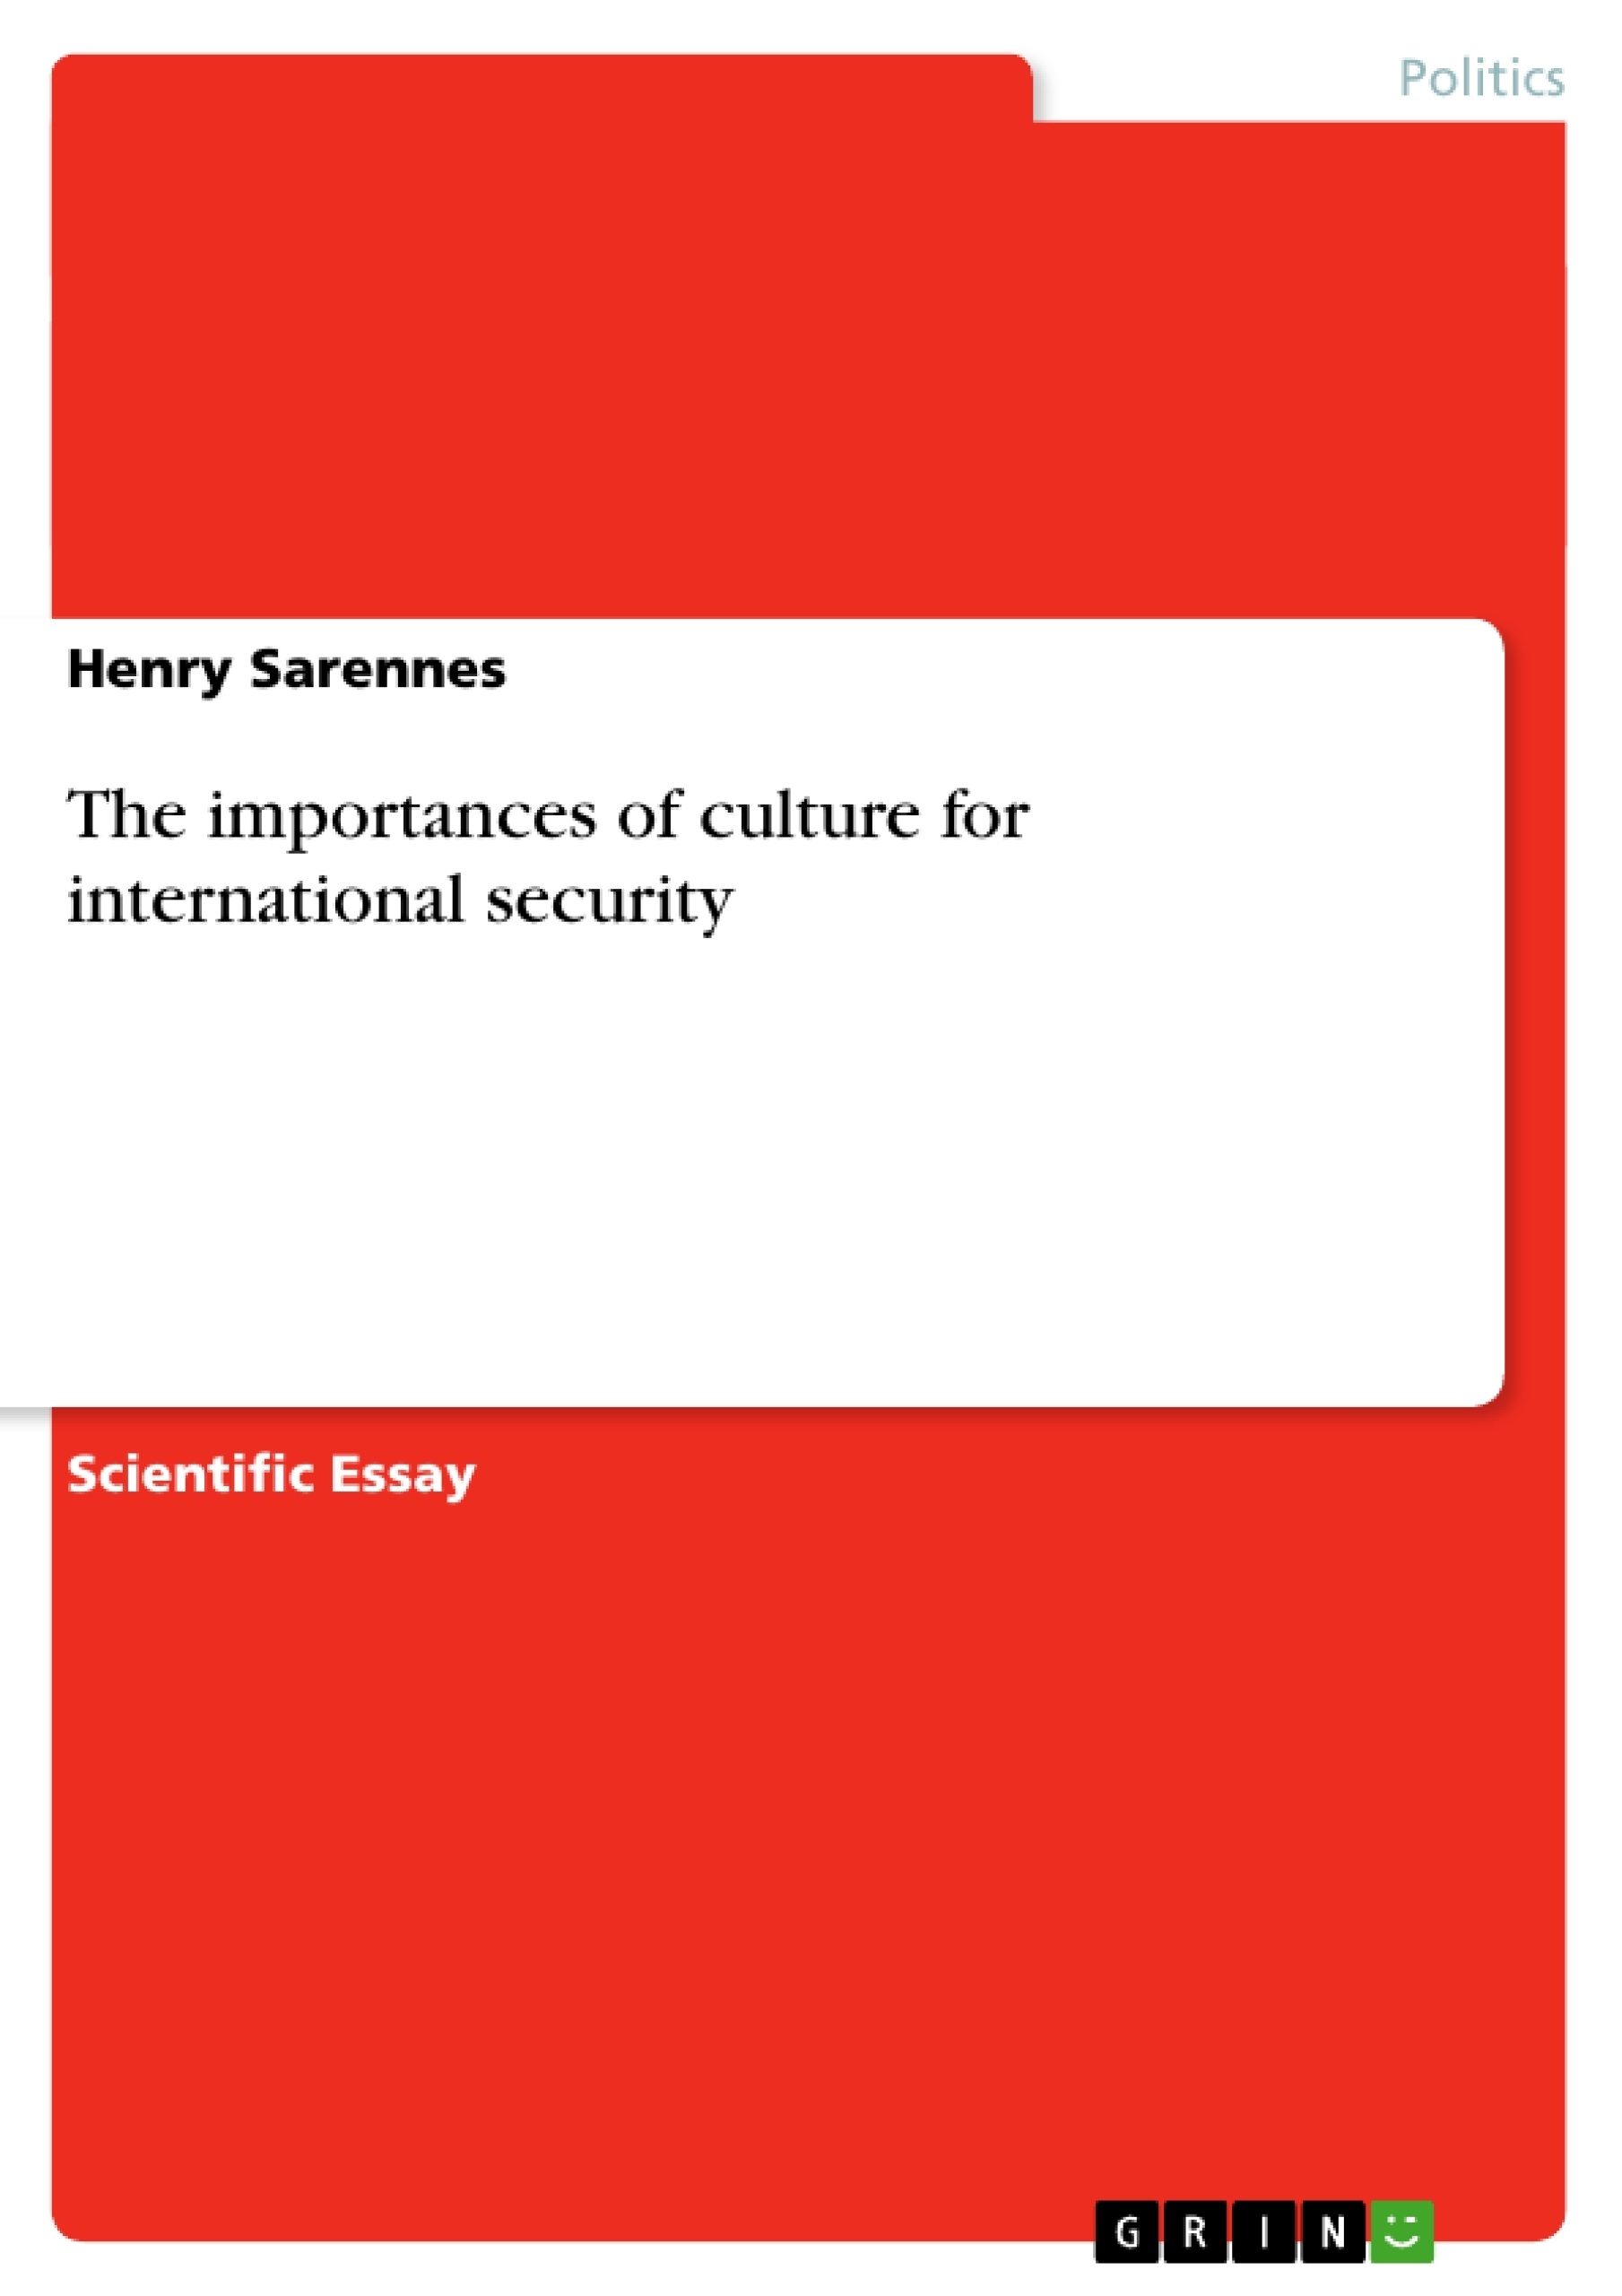 Titre: The importances of culture for international security